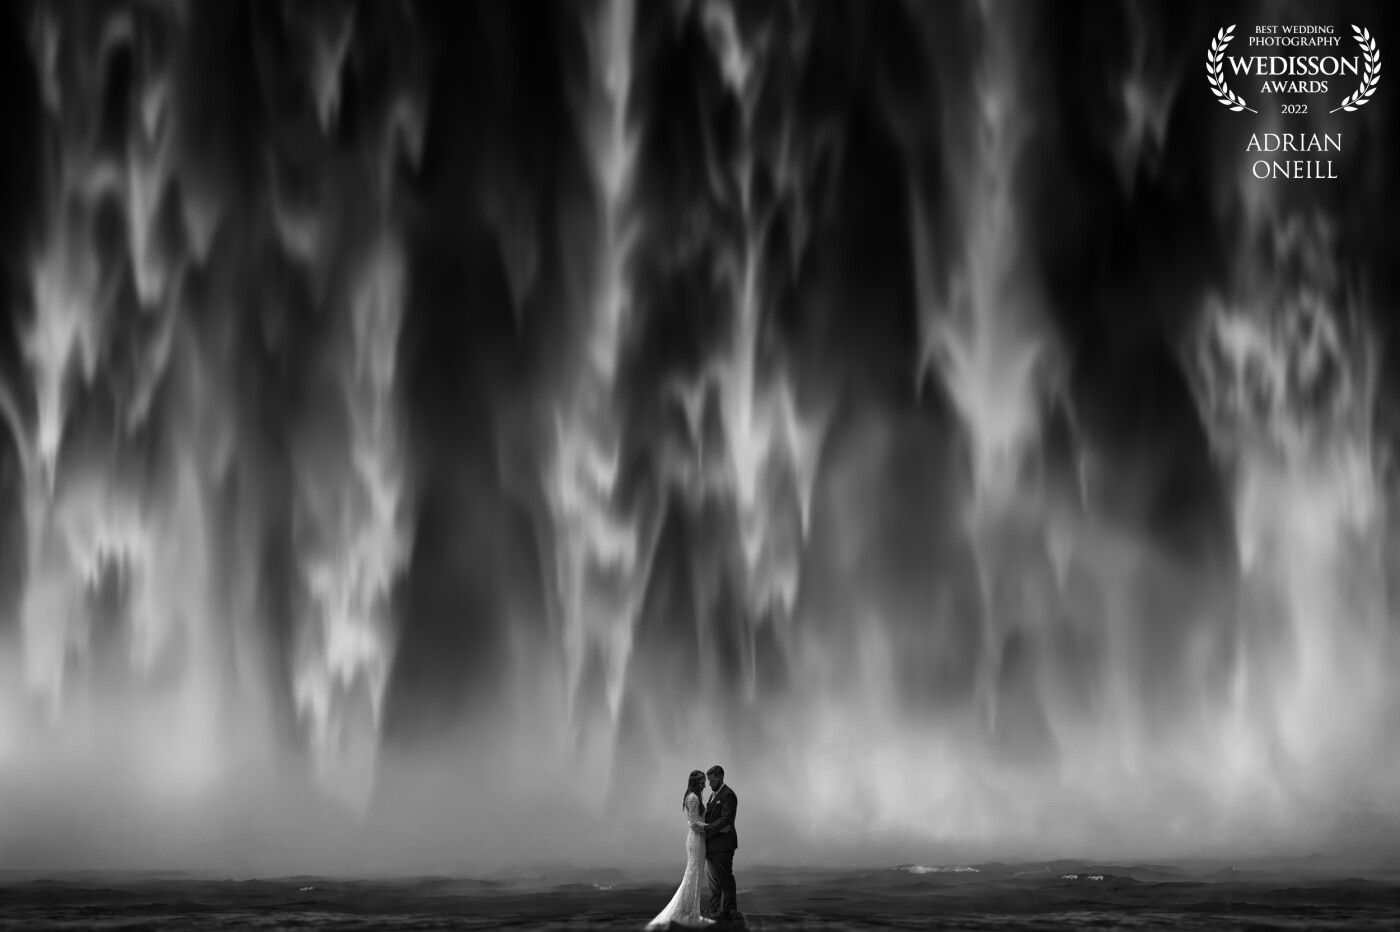 This couple travelled from the USA to Iceland to say their vows, brilliant and most memorable day...the weather was brutal but still managed to get awesome images.